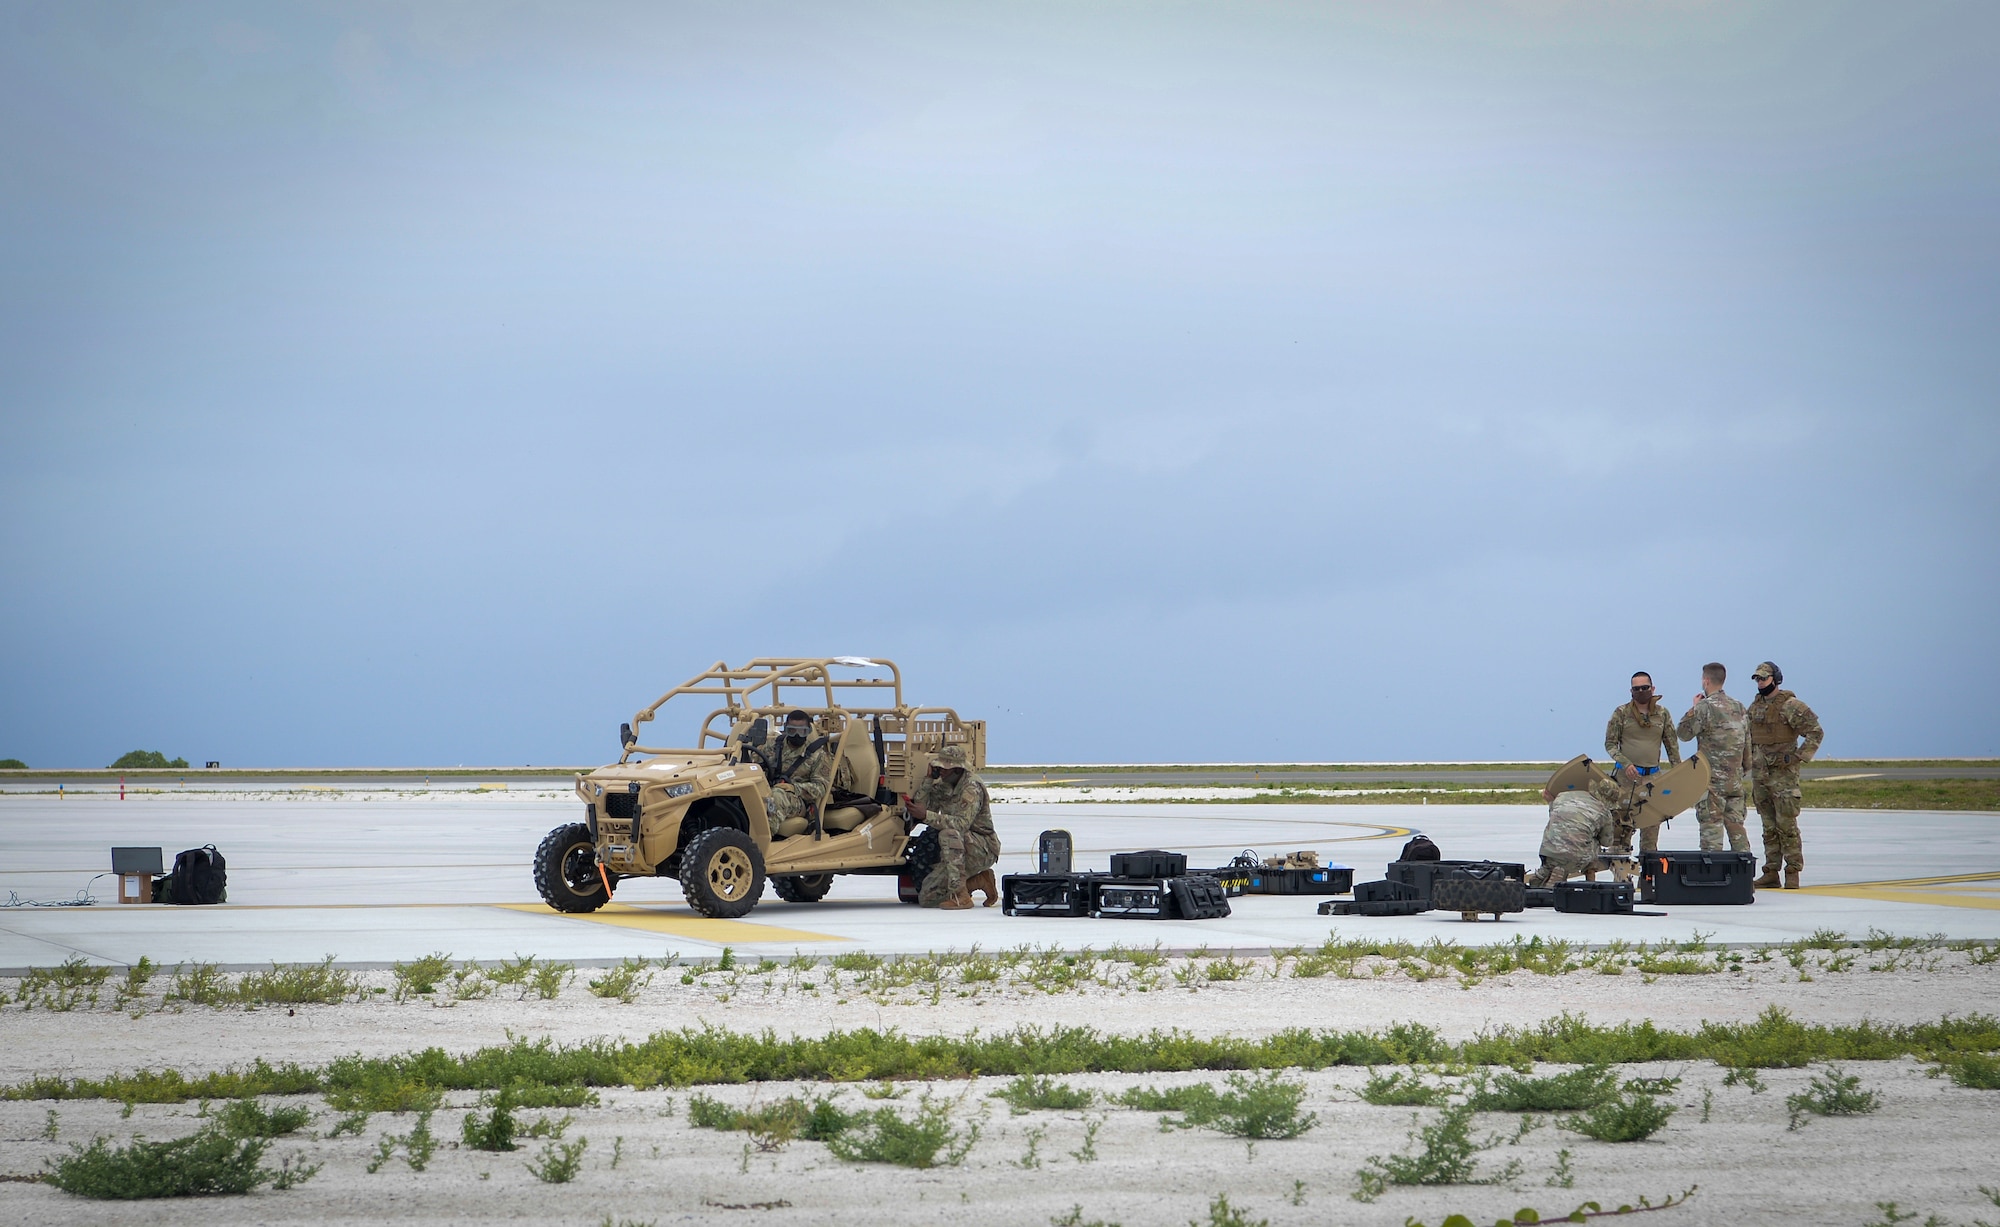 U.S. Air Airmen assigned to the 644th Combat Communications Squadron, set up a communication fly away kit during a field training exercise on Wake Island, Western Pacific, April 2, 2021.